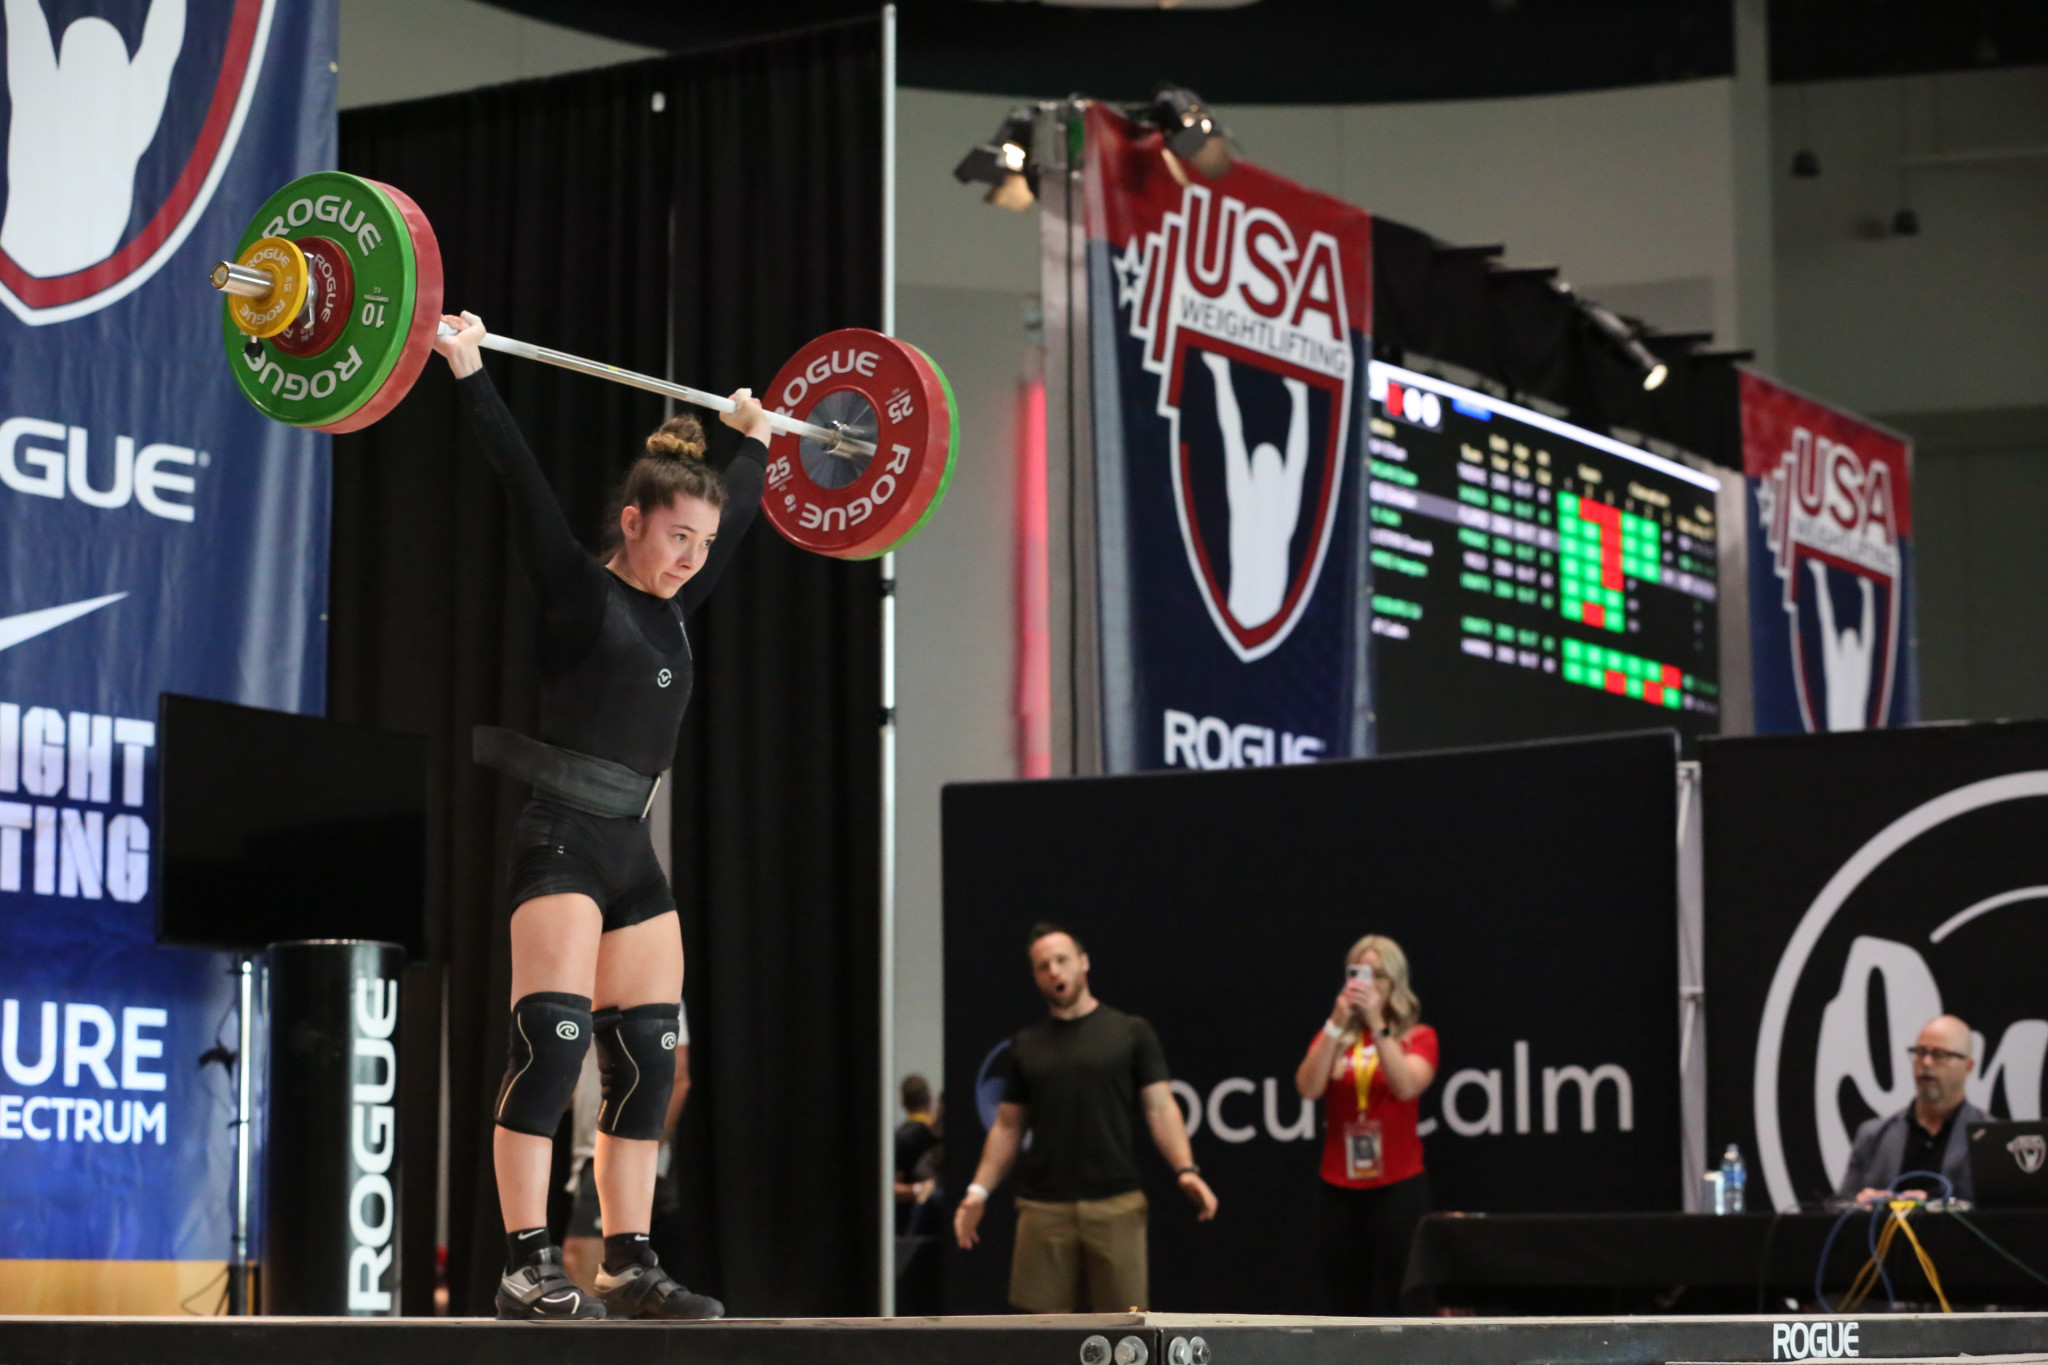 Katie Estep of the United States took silver behind Guillen in the women's 59kg category ©USA Weightlifting